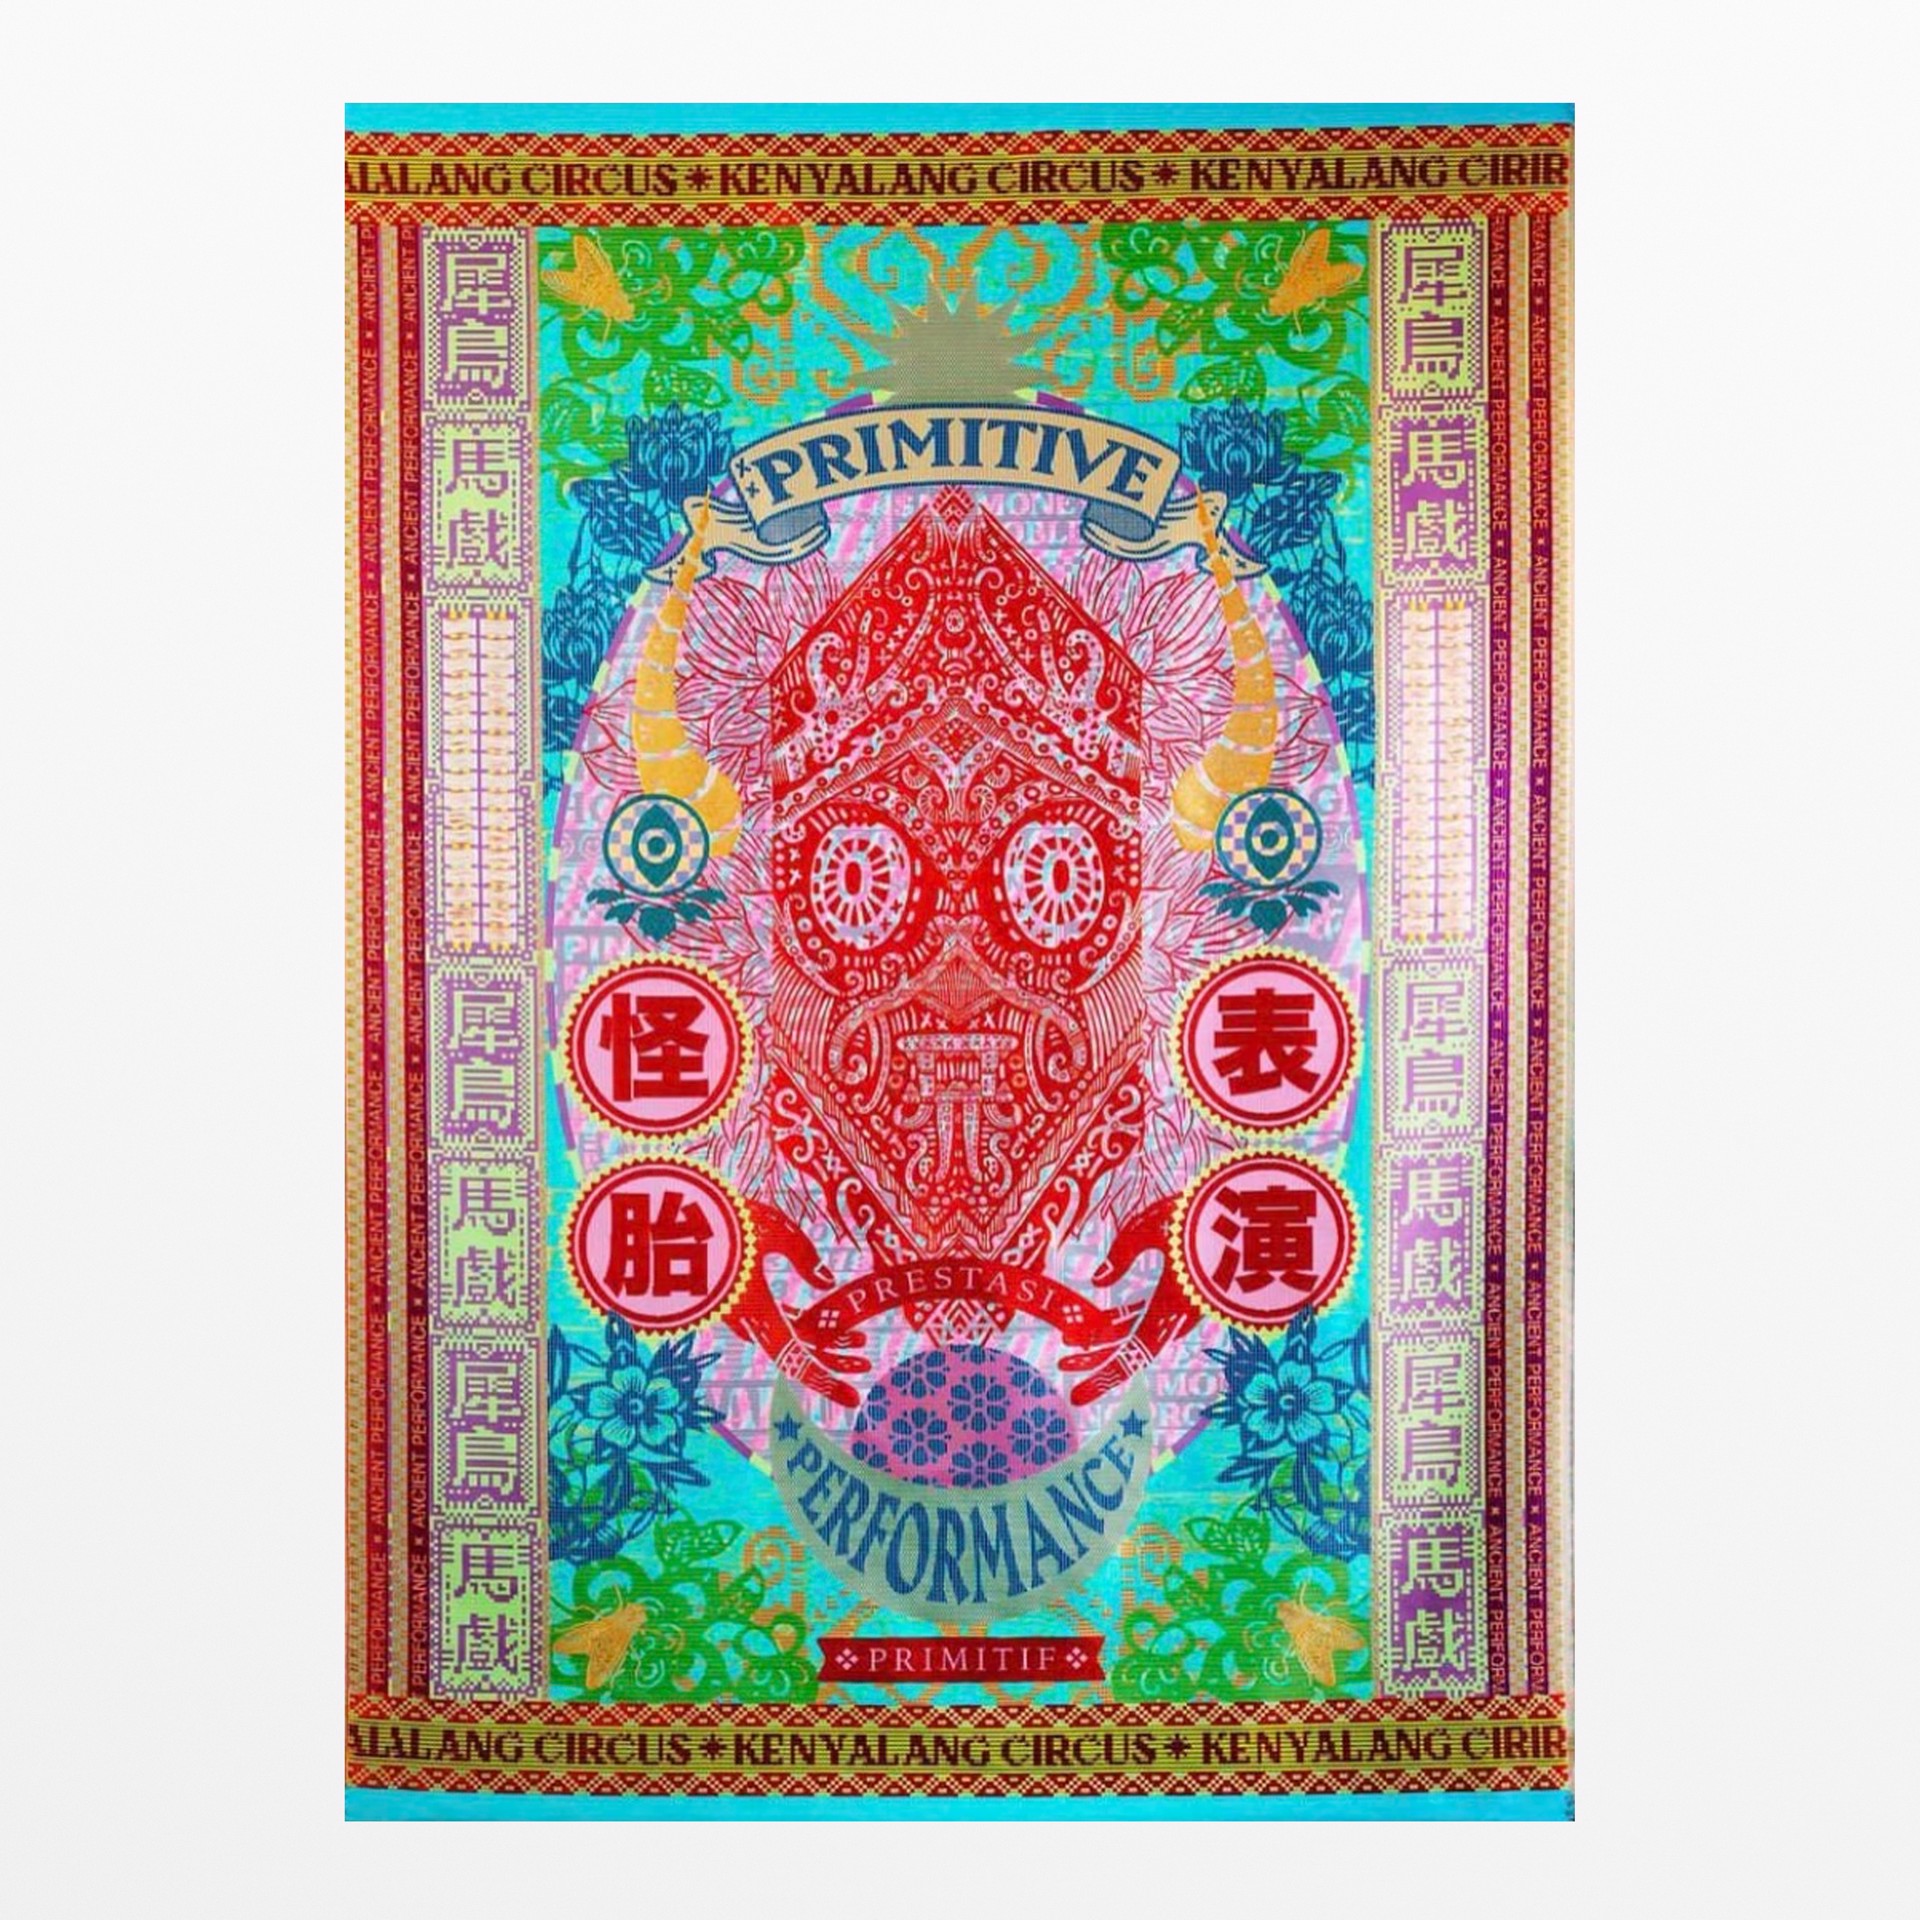 Primitive Performance (Woven Poster #08) by Marcos Kueh